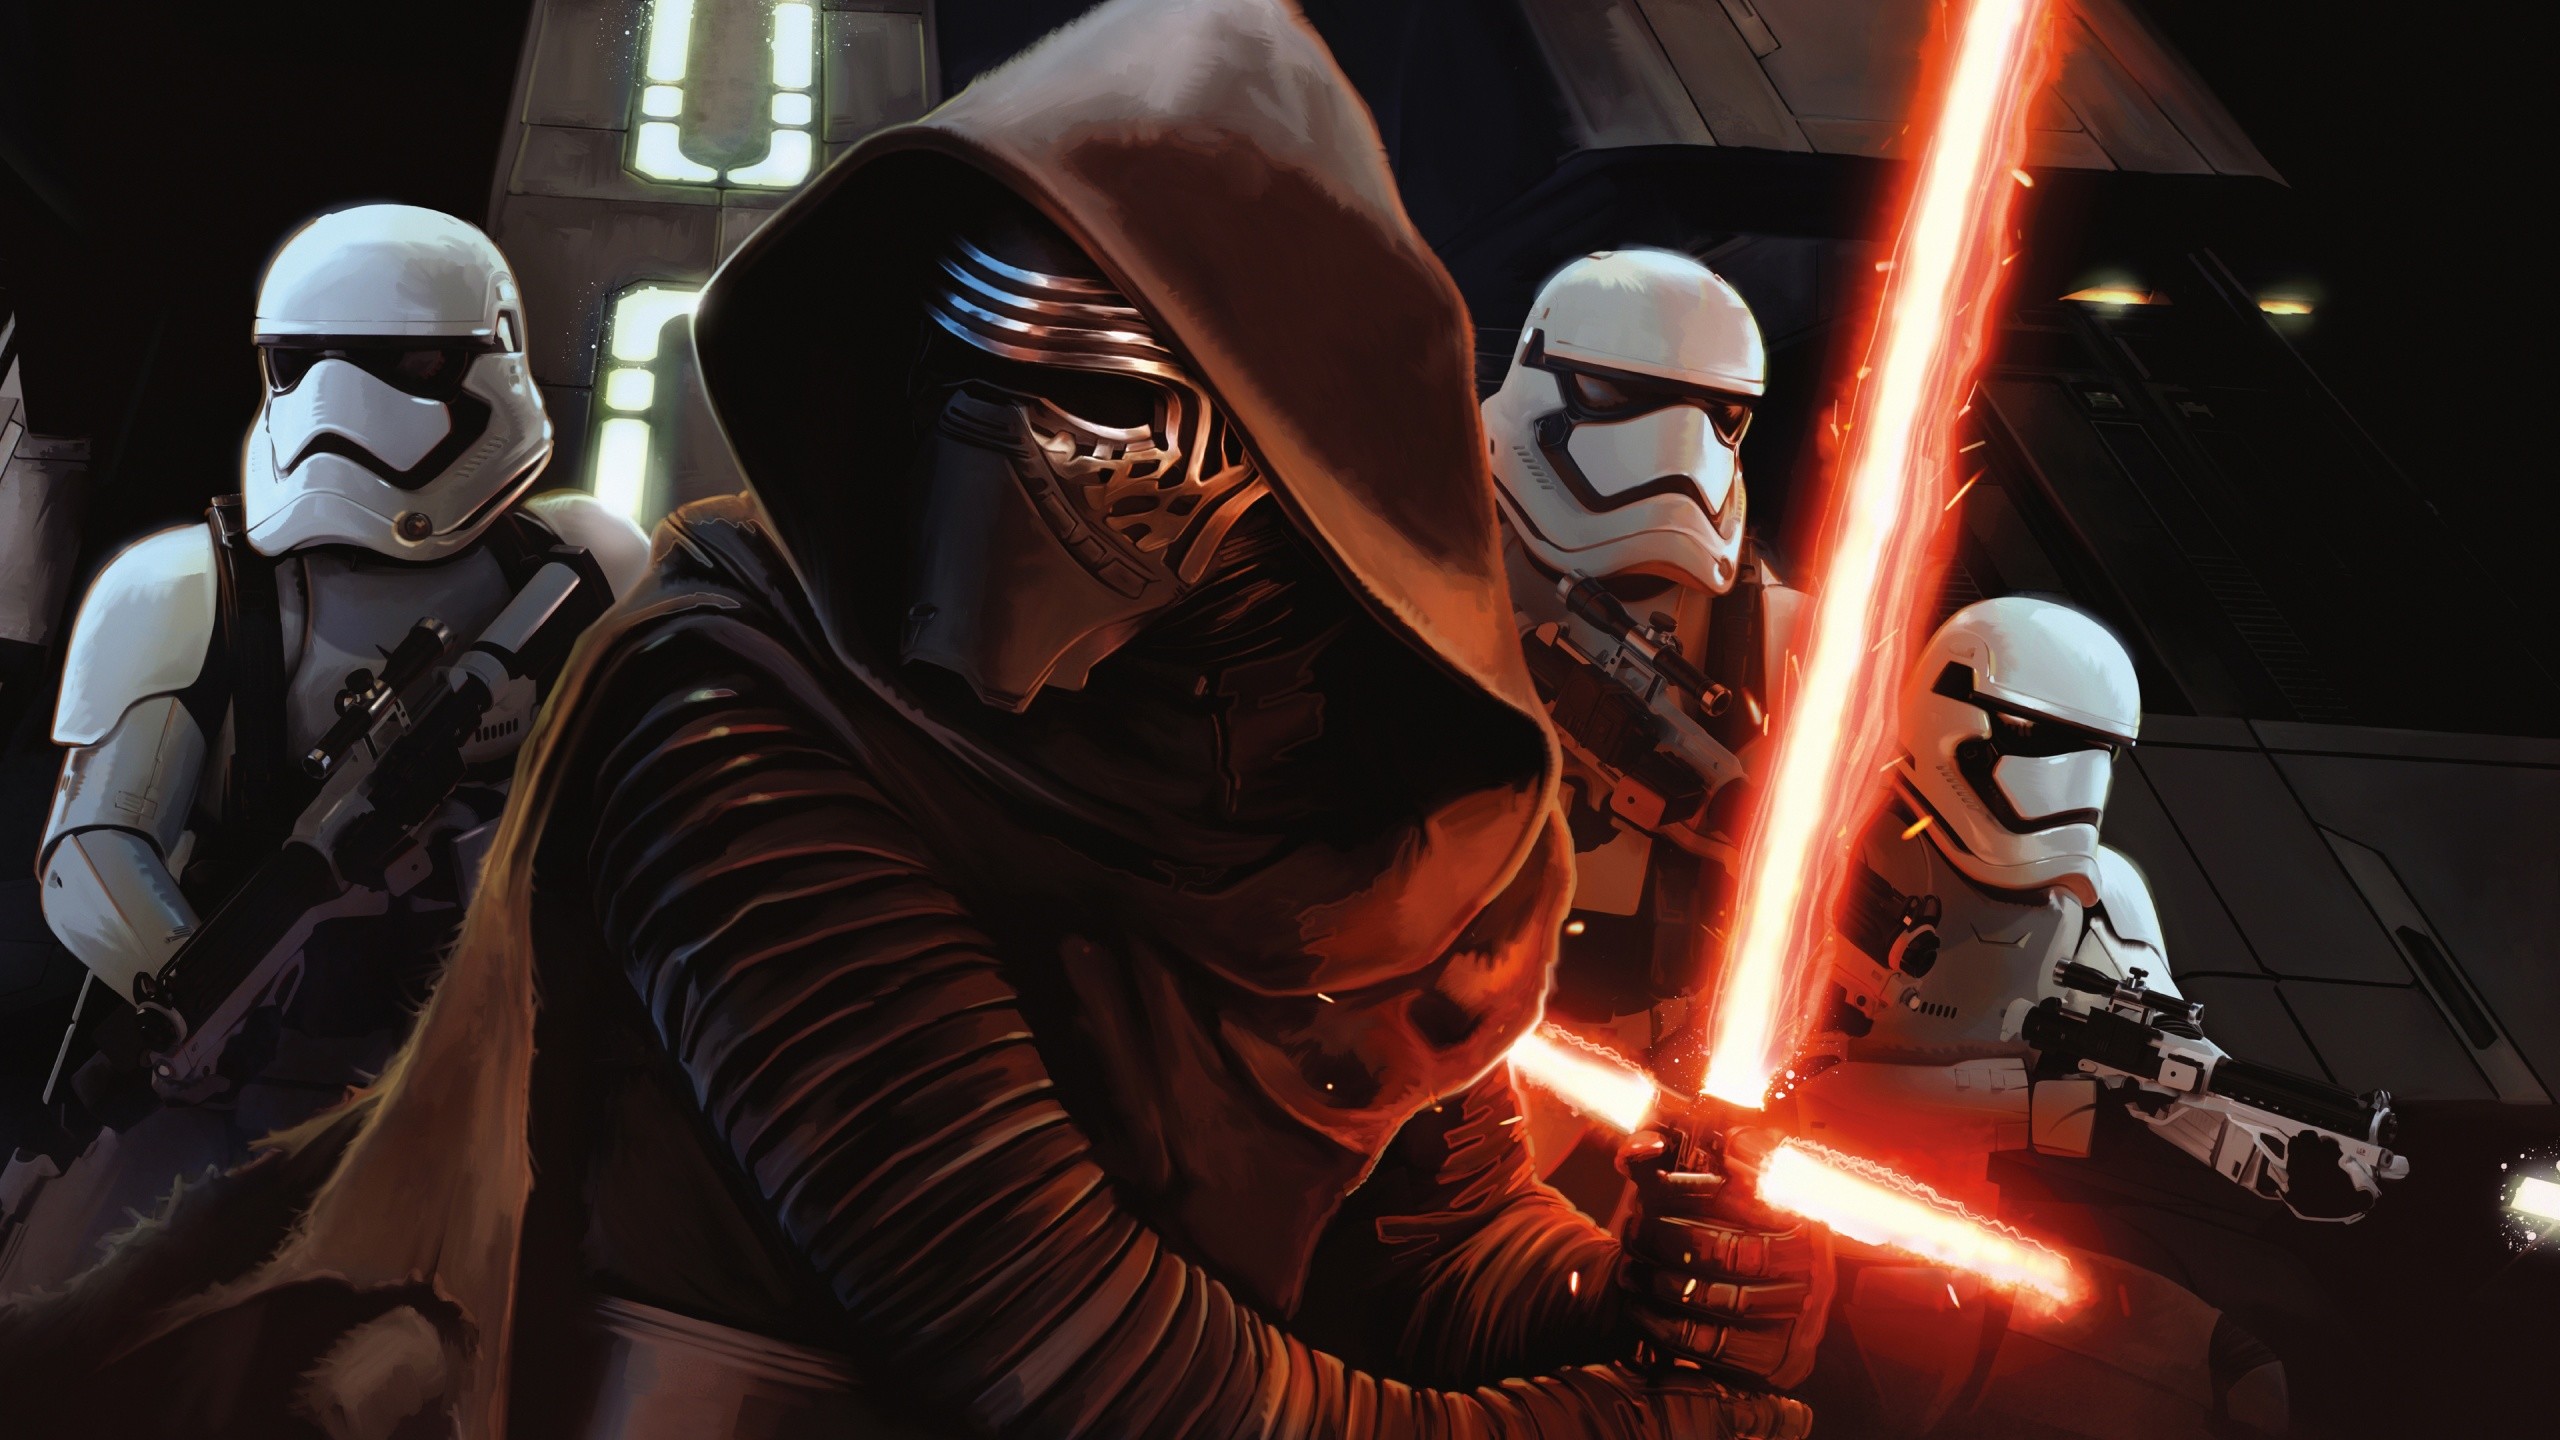 2560x1440 Star Wars Episode VII The Force Awakens Wallpapers | HD Wallpapers 4